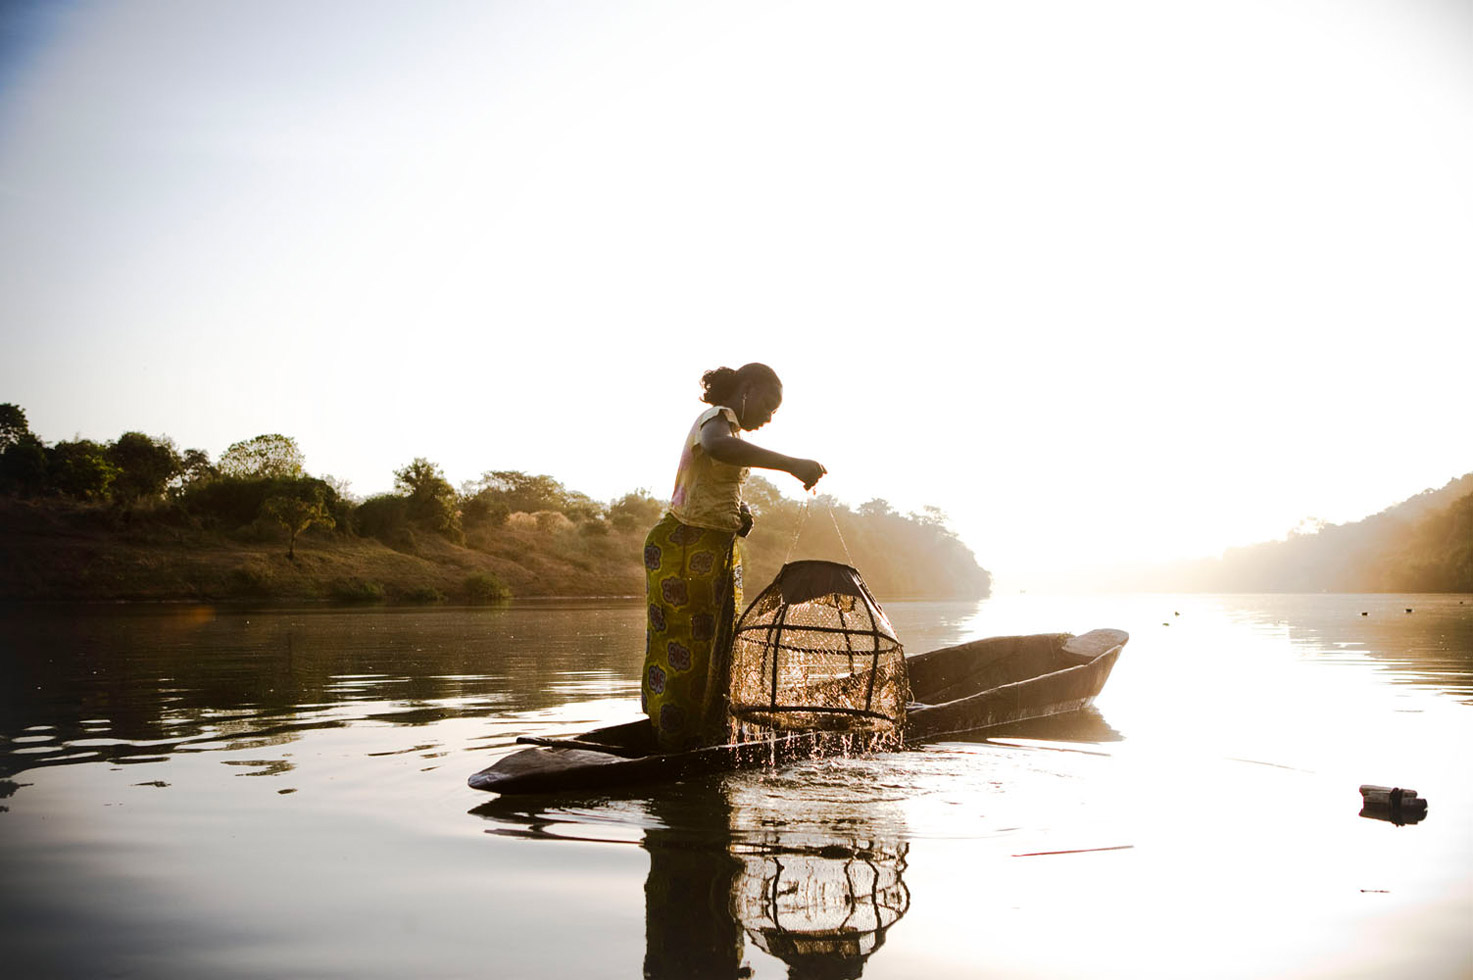 A migrant worker from Mali pulls up the fishing pots from River Gambia, near the Gambian village of Fatoto.